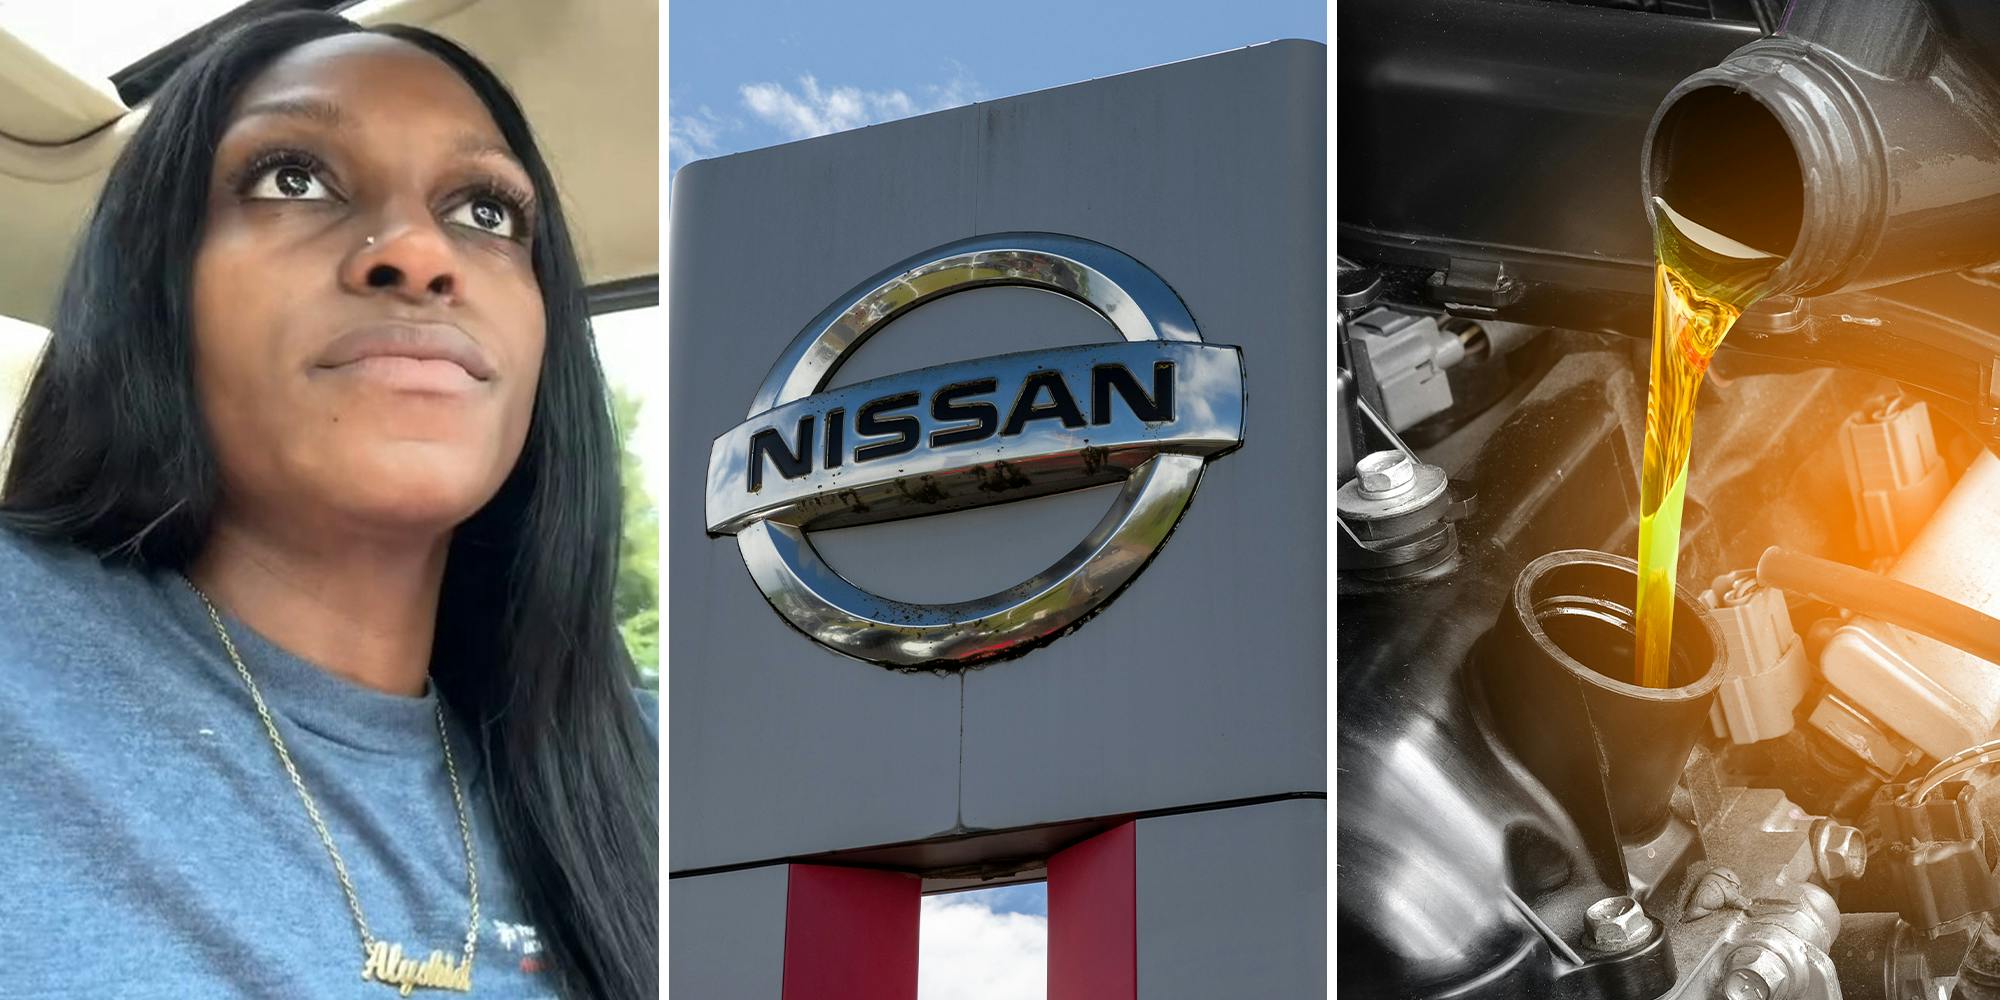 Nissan driver takes car to dealership for oil change. They tell her she needs a new $6K transmission